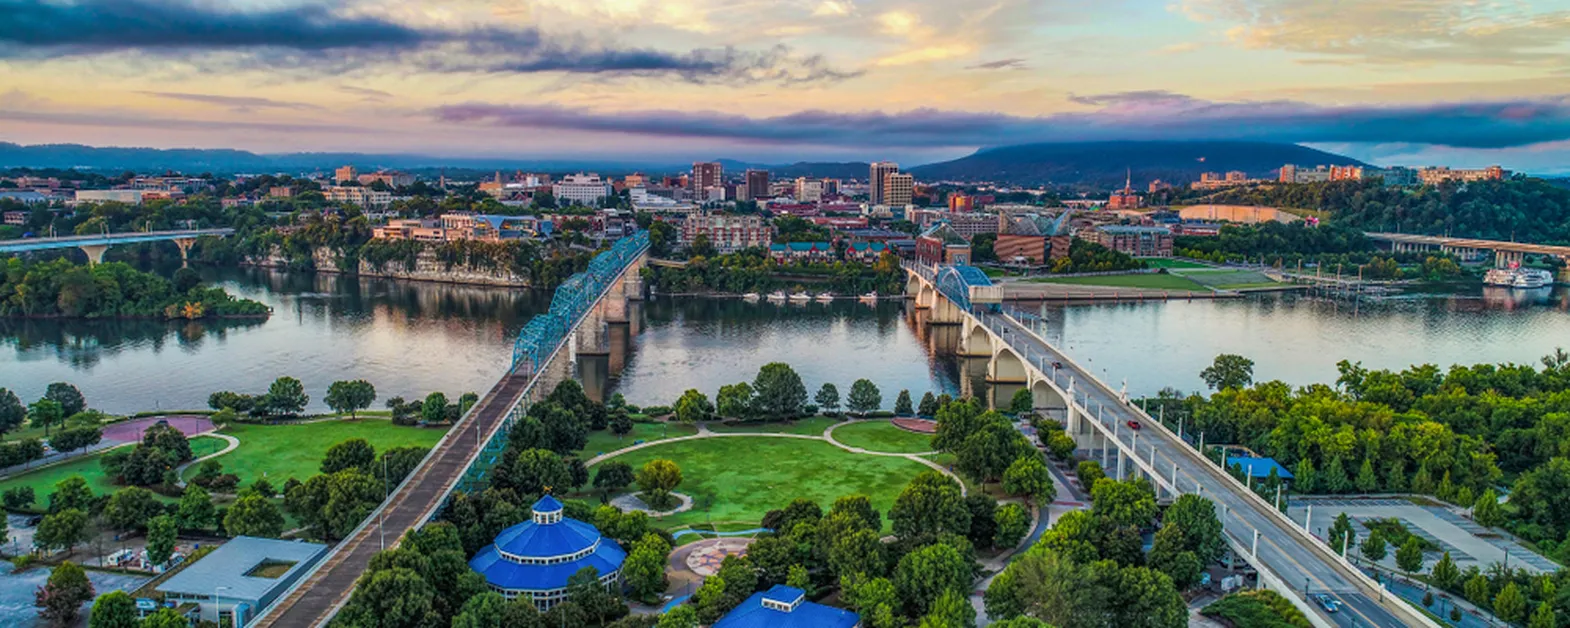 Take a 24-Hour Tour Through Historic Chattanooga, Tennessee 